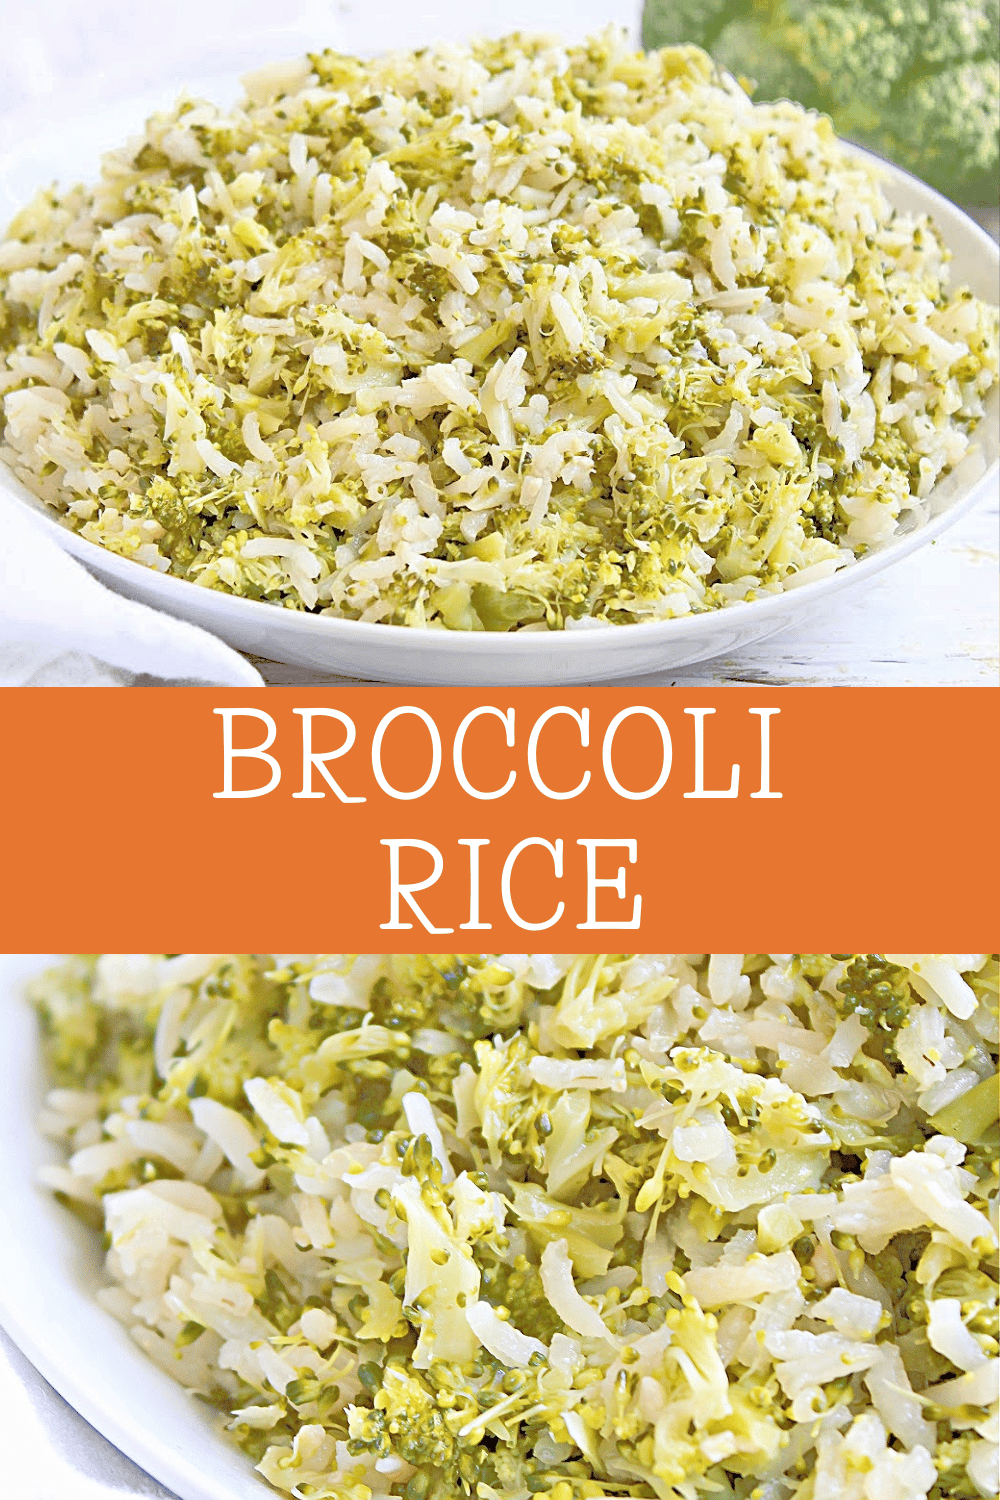 Broccoli Rice ~ Sauteed fresh broccoli with long grain white rice is easy to make and on the table in 30 minutes or less!  via @thiswifecooks